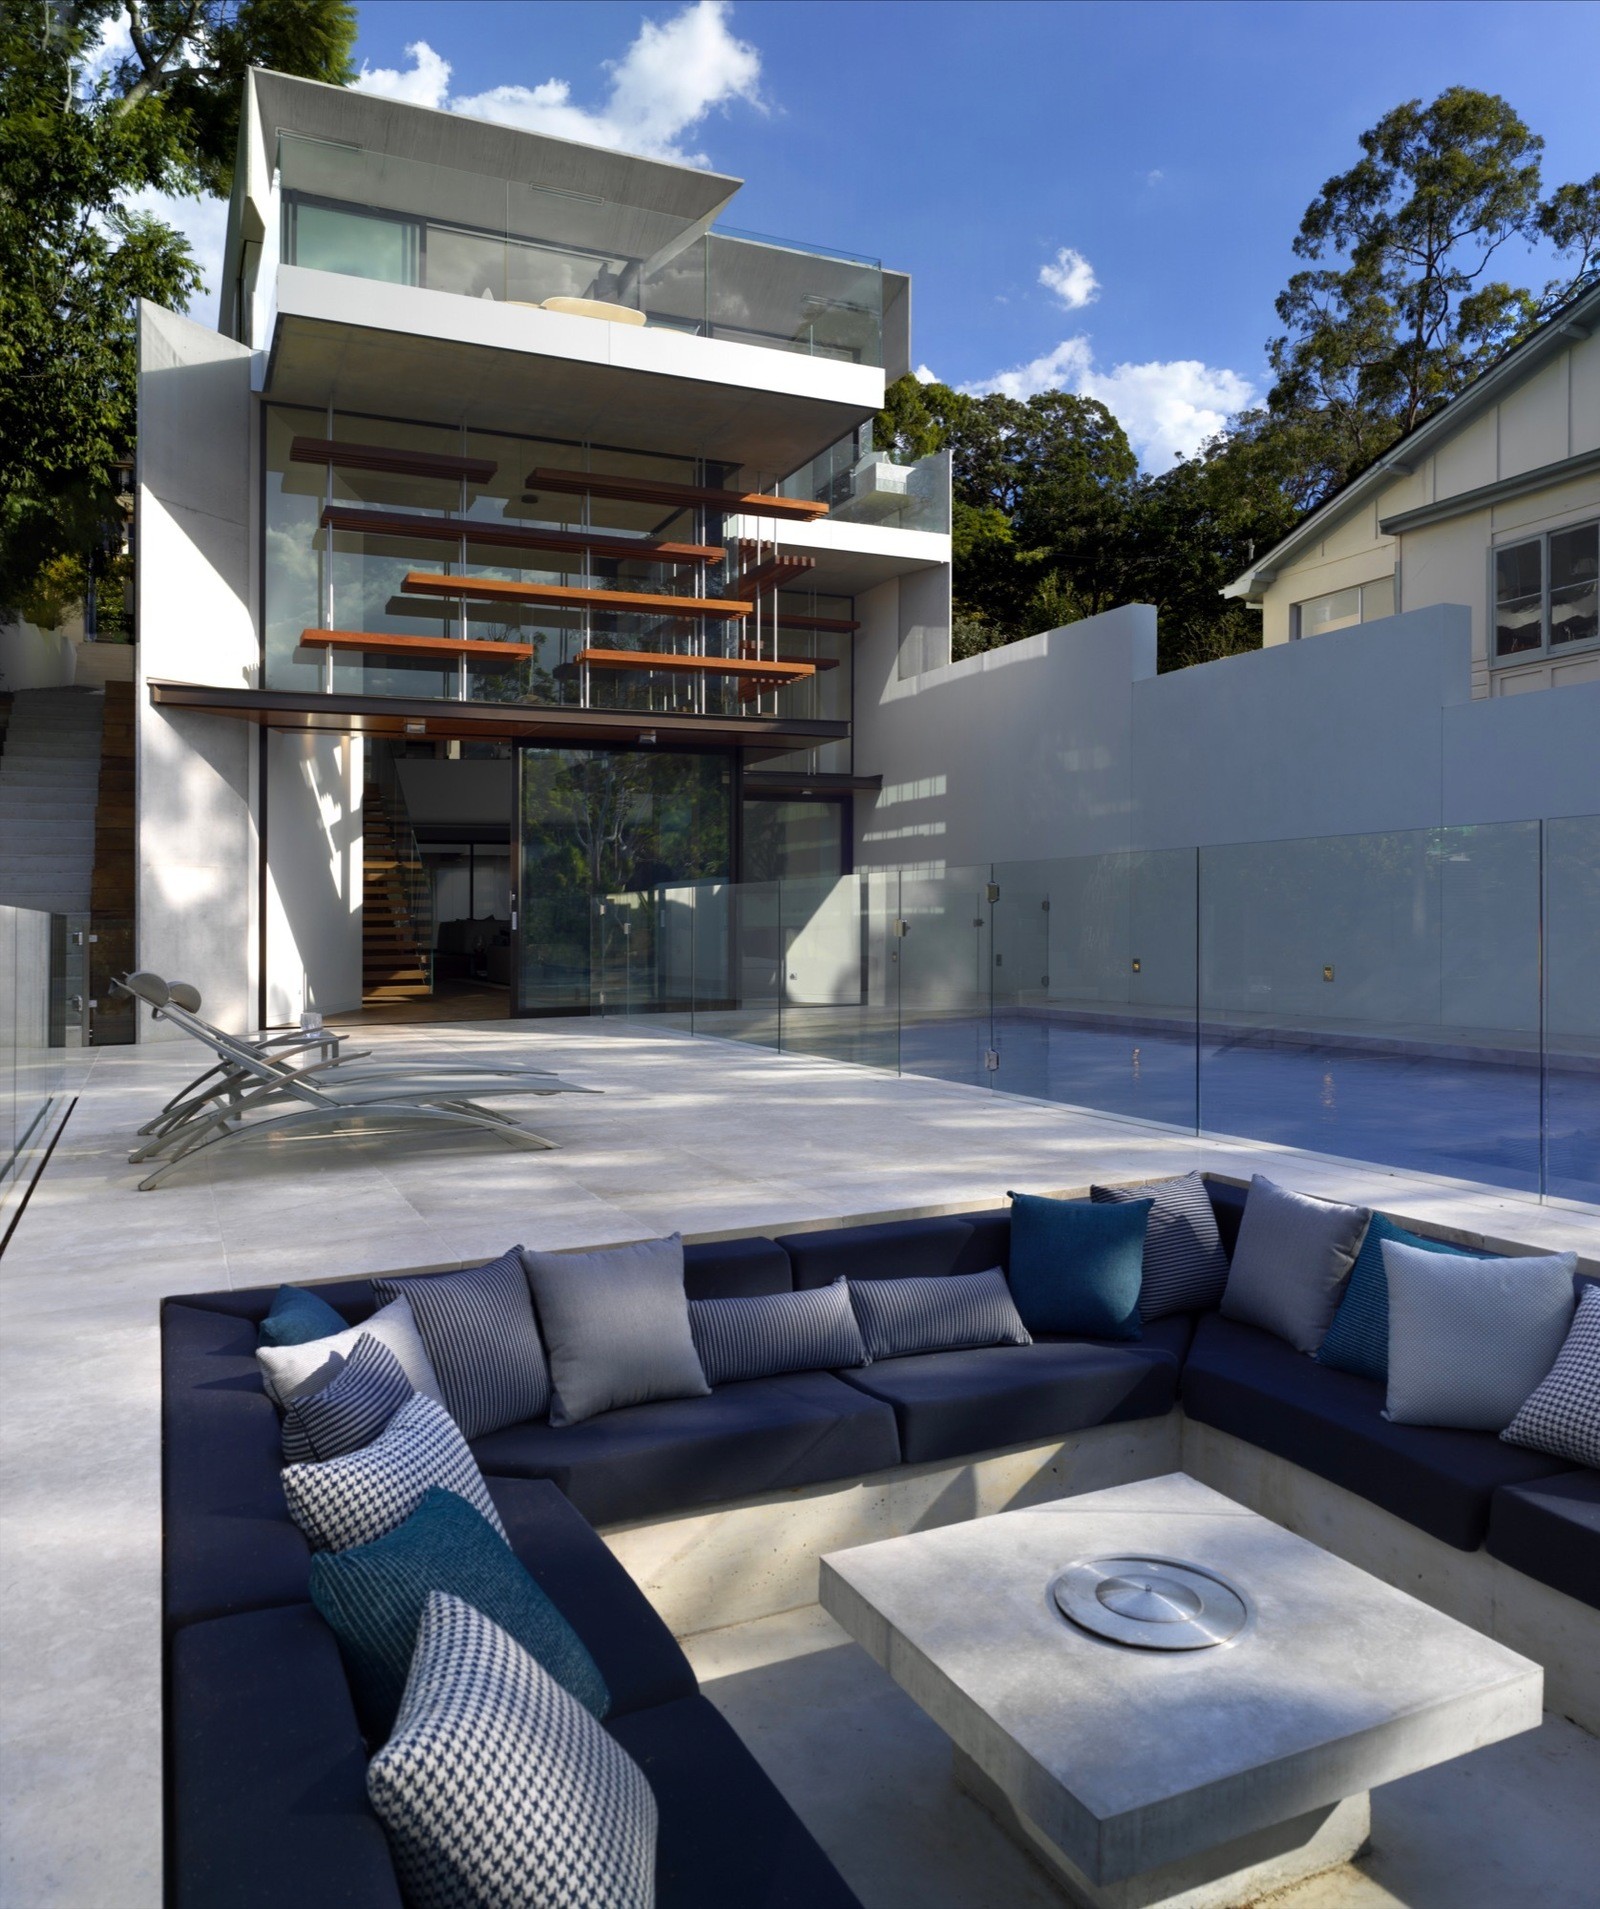 House in Sydney